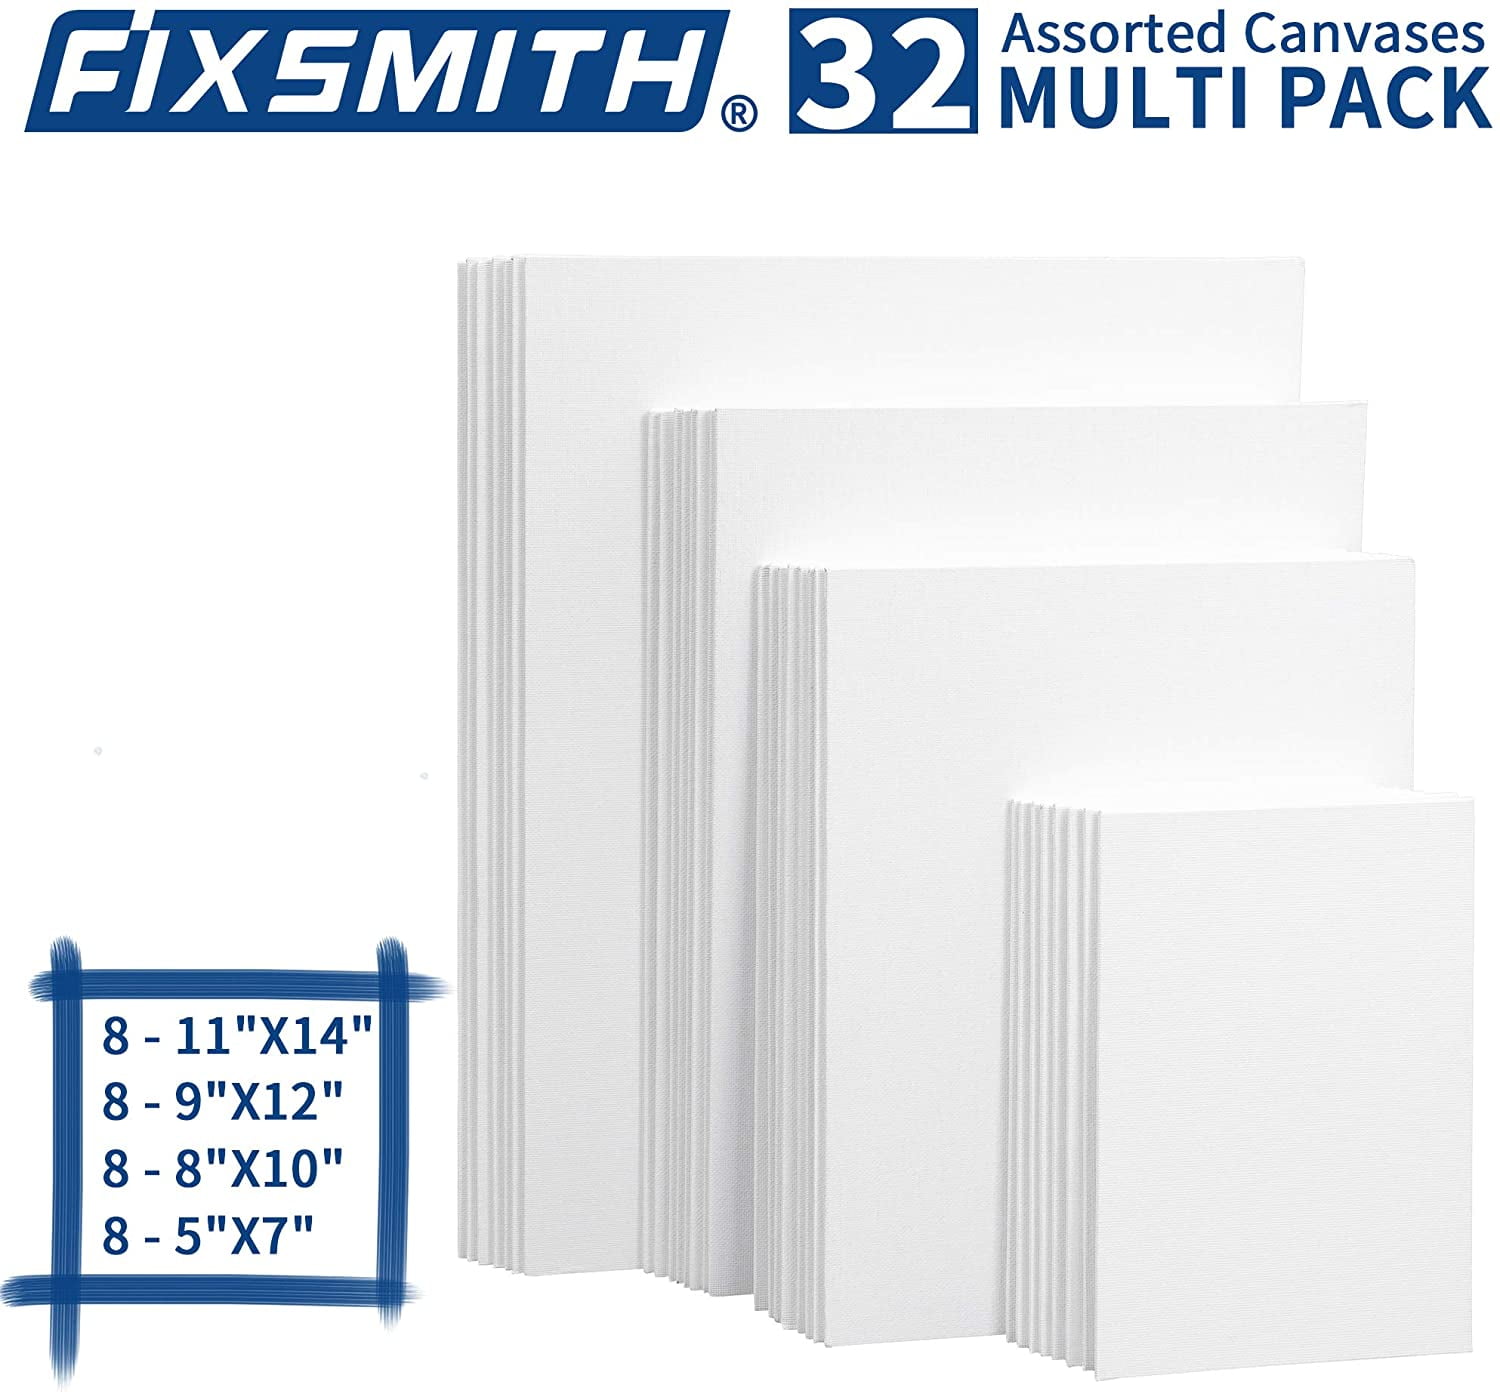 FIXSMITH Painting Canvas Panel Boards - 5x7 Inch Art Canvas,24 Pack with  FIXSMITH Painting Canvas Panels- 24 Pack Canvas Board,8x10 Inch